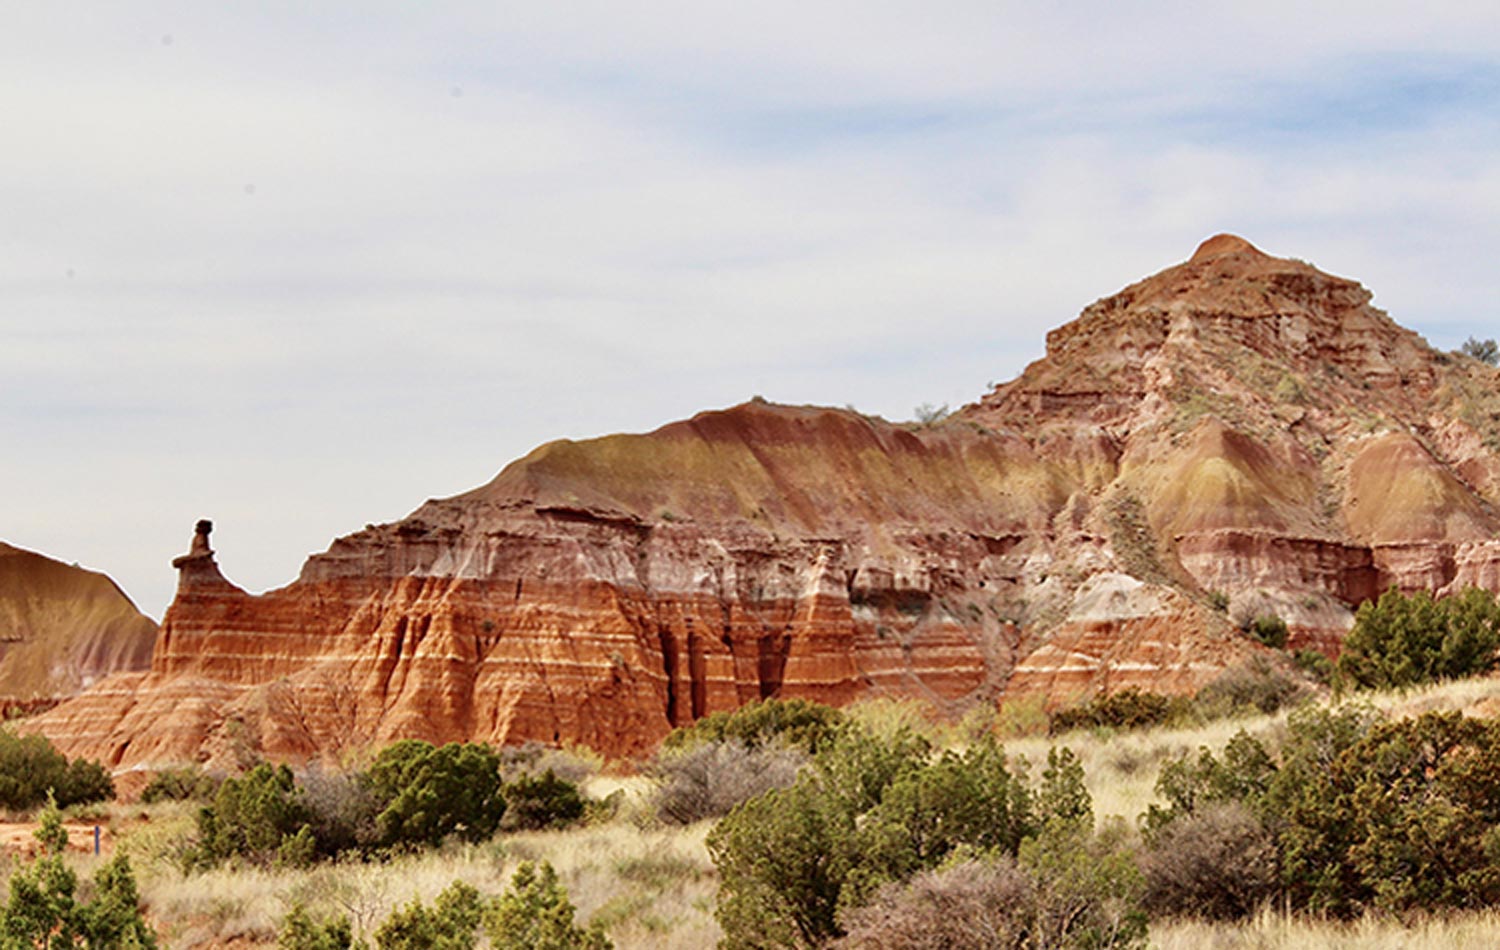 A distinctive “hoodoo” rock formation near Capitol Peak in Palo Duro Canyon State Park in the Texas panhandle